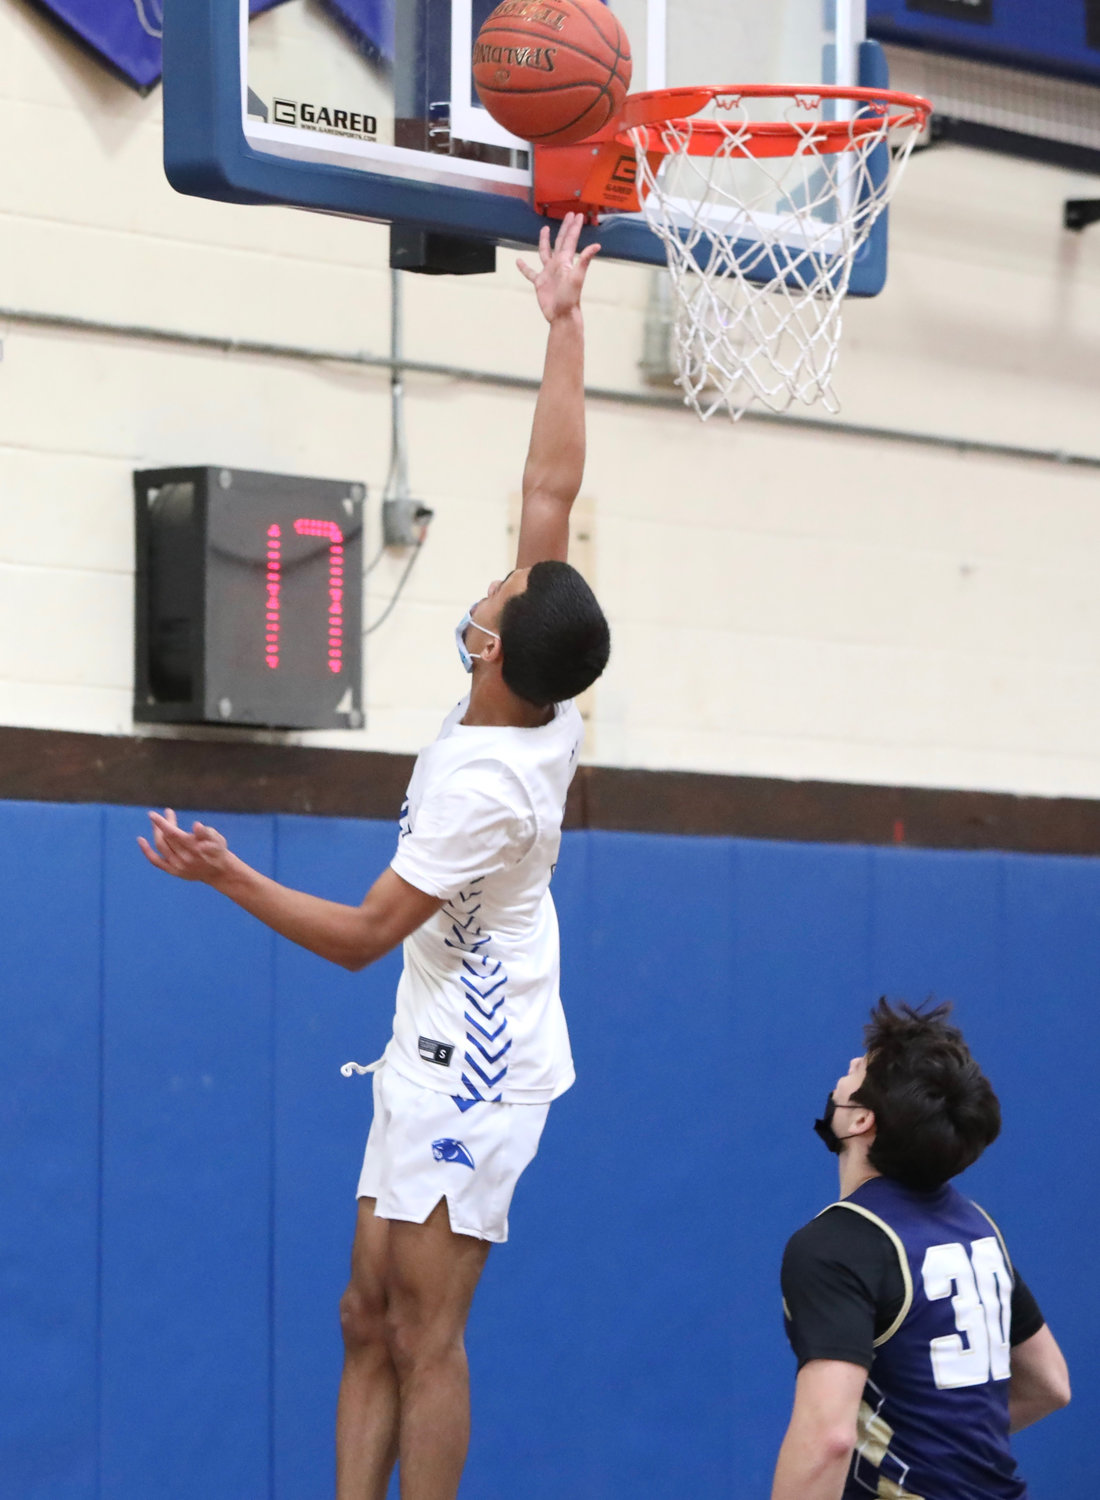 Monticello senior captain Pedro Rodriguez slashes to the rim with two of his game-high 25 points that included a pair of threes and hitting seven-of-eight from the stripe. He had 10 of Monticello’s first quarter points as they jumped on the Bulldogs 15-3 by the end of the quarter.